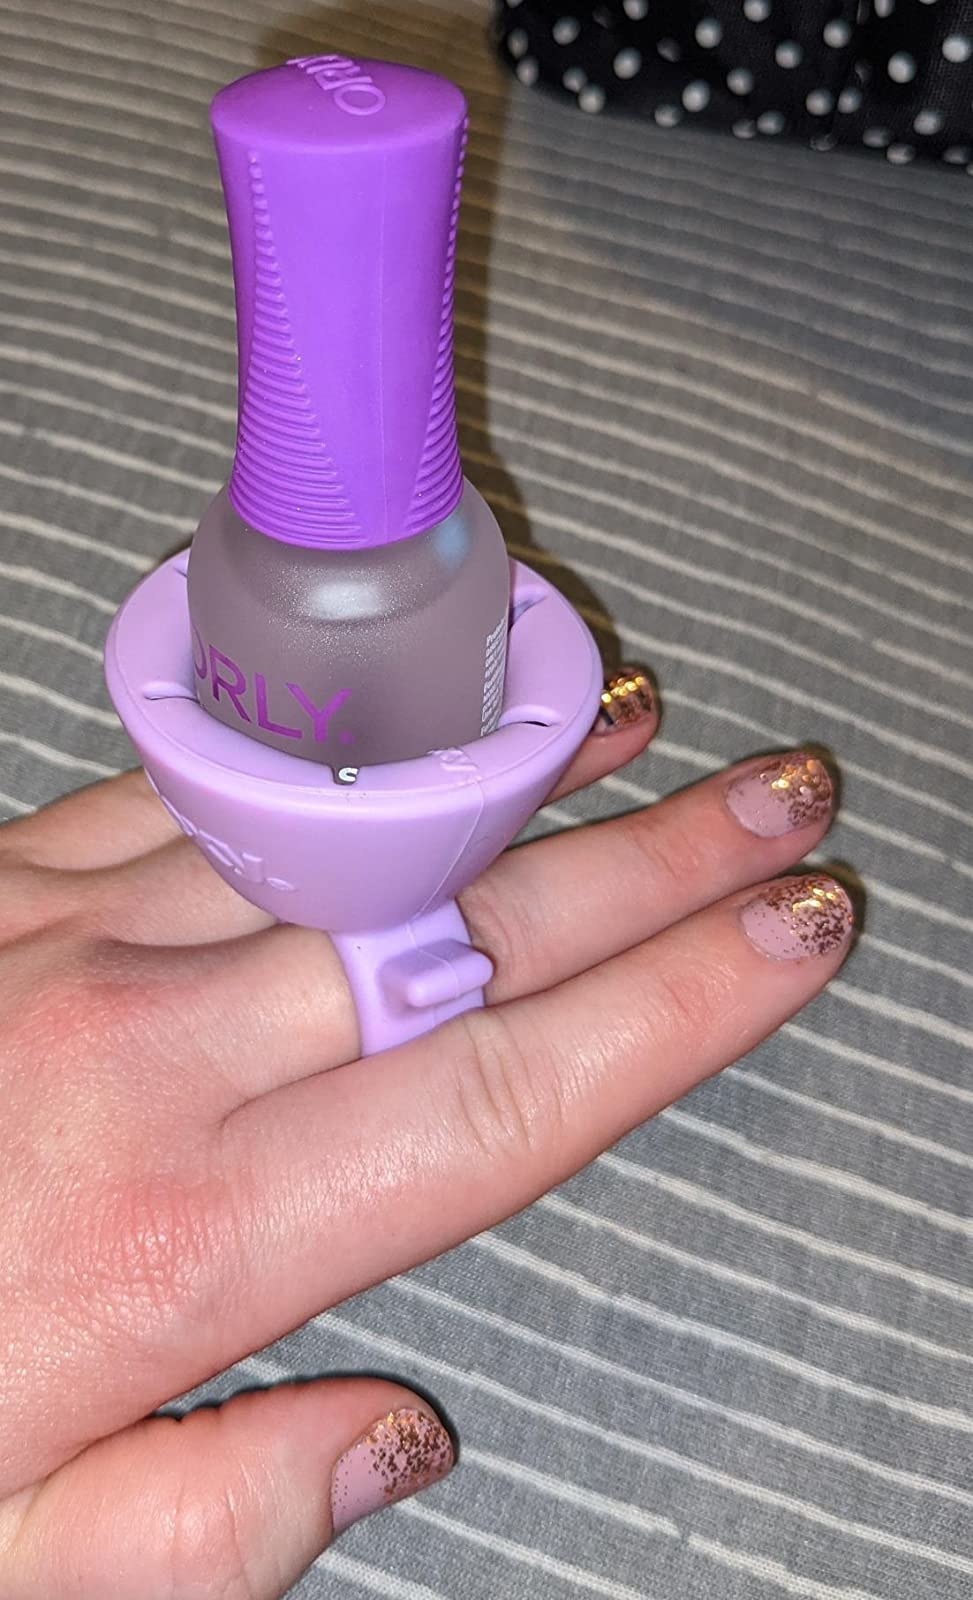 A reviewer wearing the nail polish bottle holder